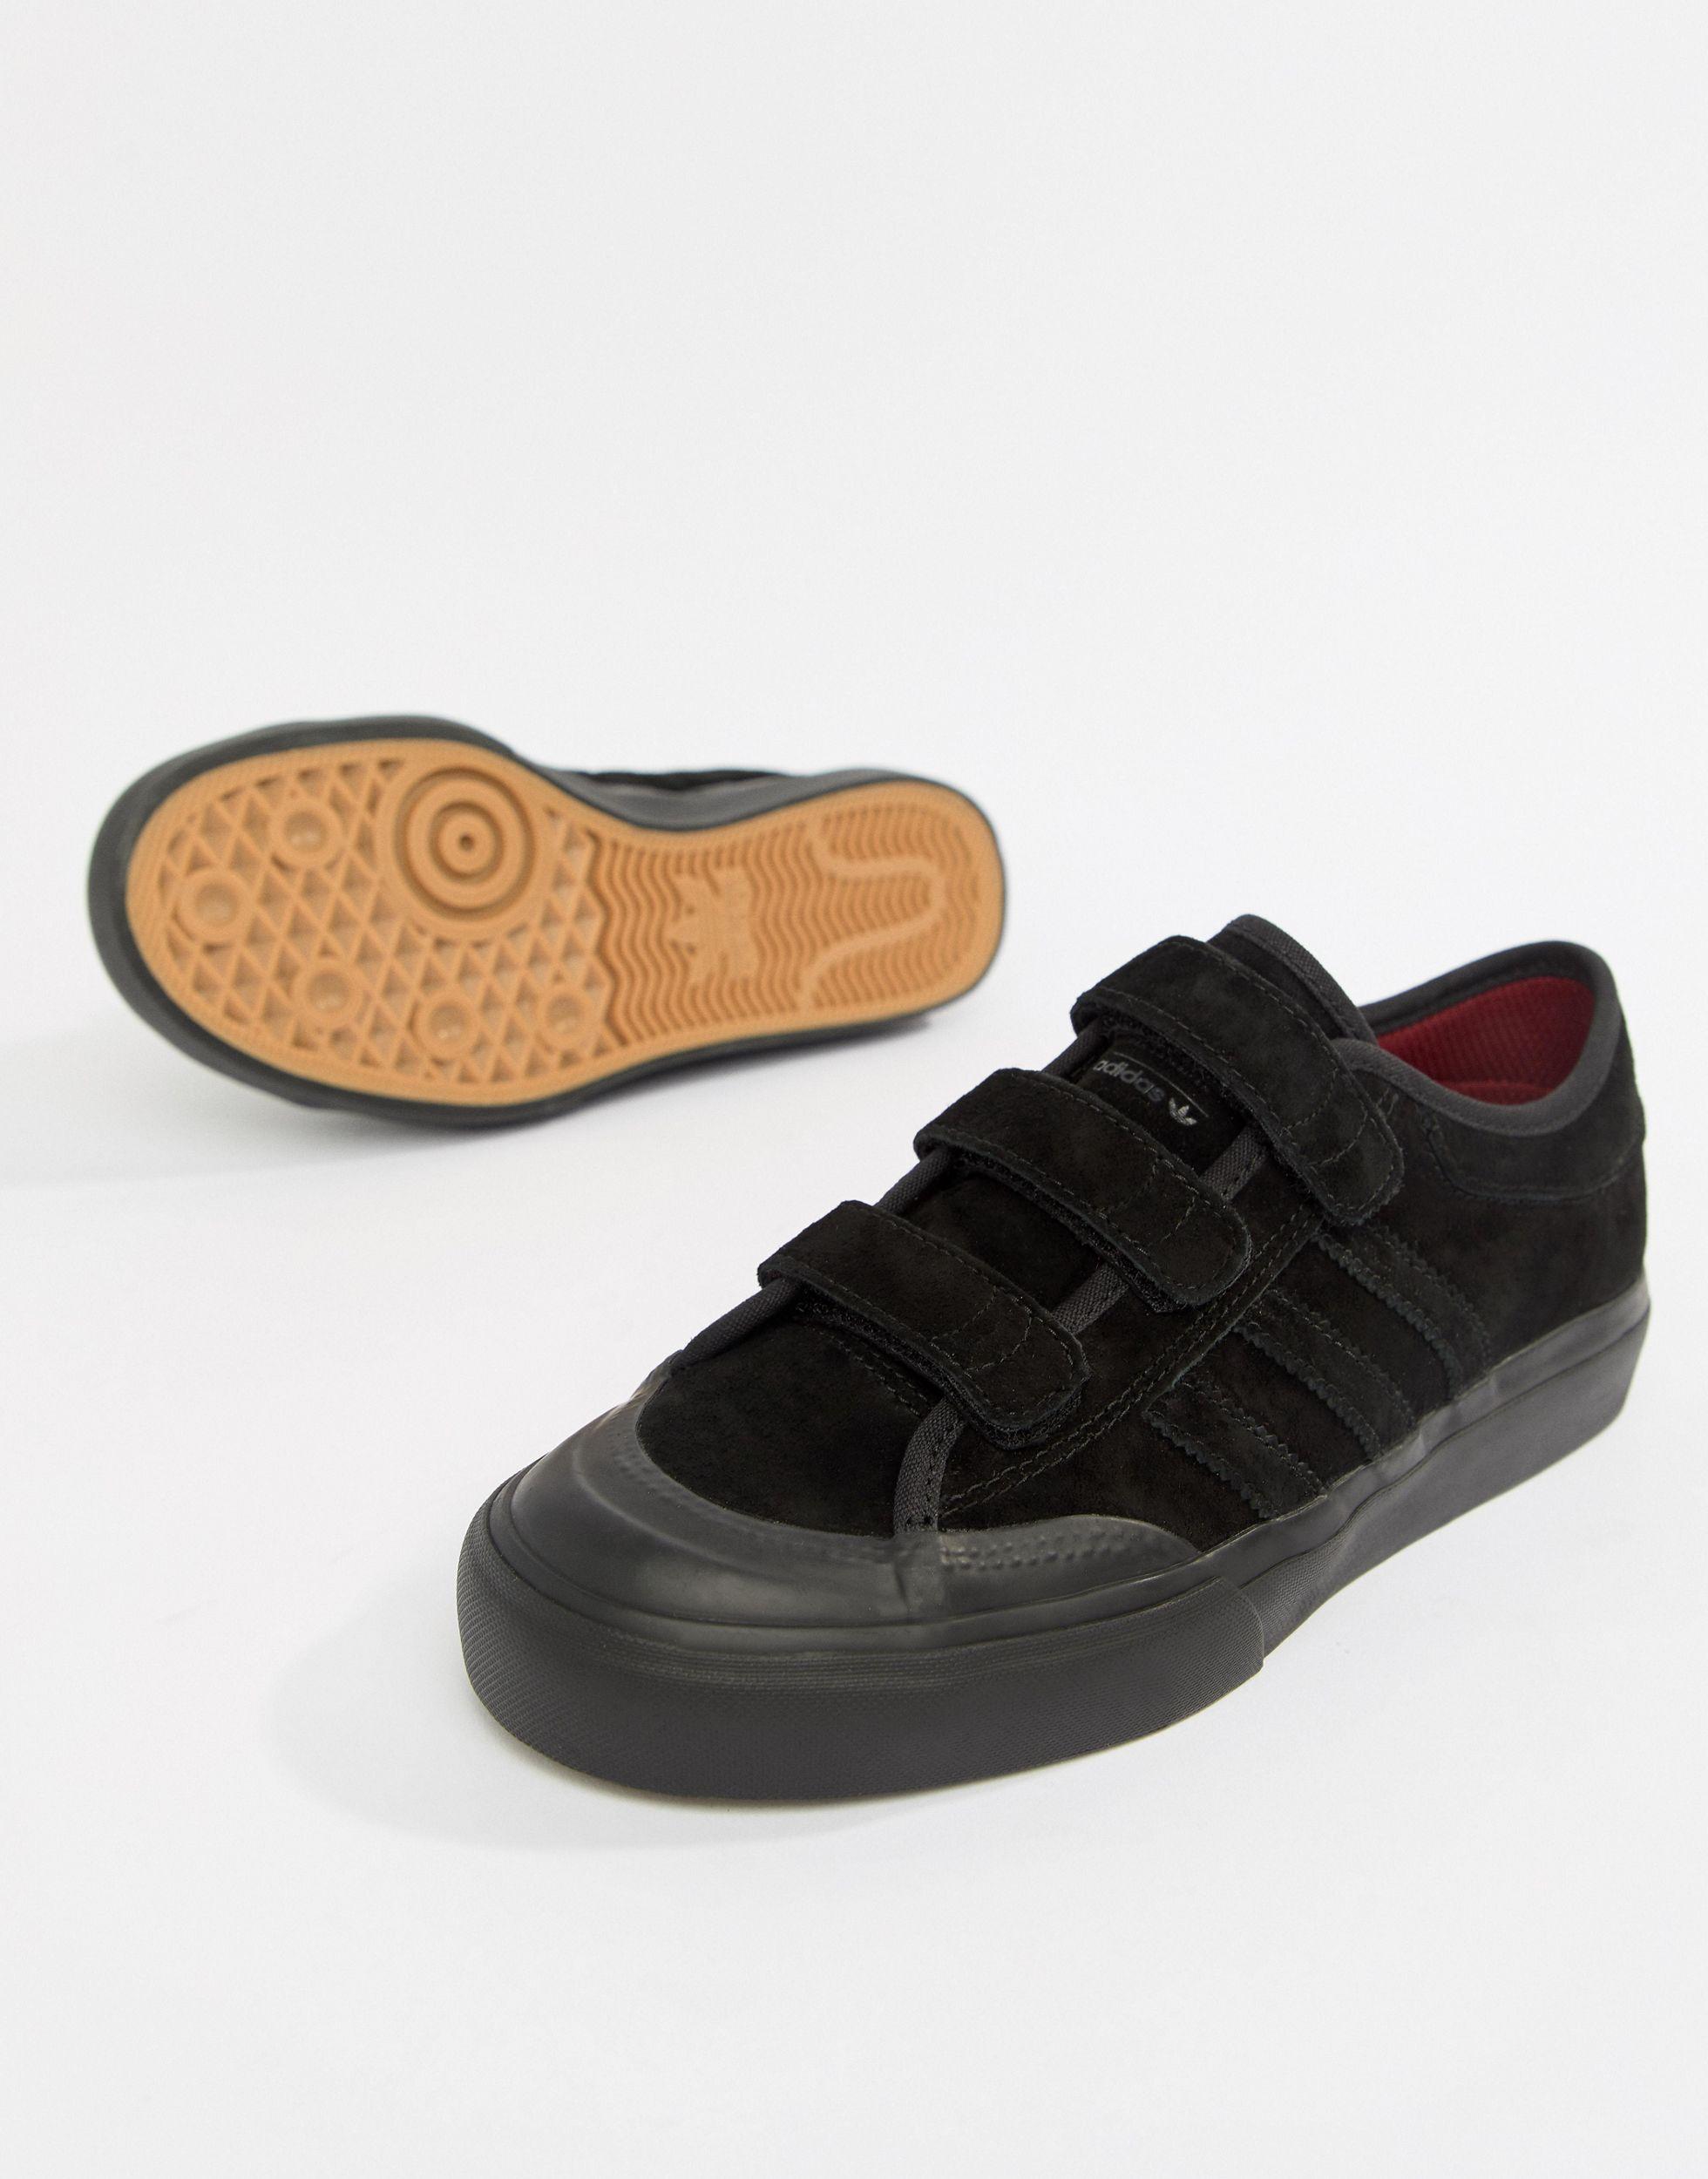 adidas Originals Rubber Adidas Skate Boarding Matchcourt Cf Sneakers With  Straps in Black - Lyst